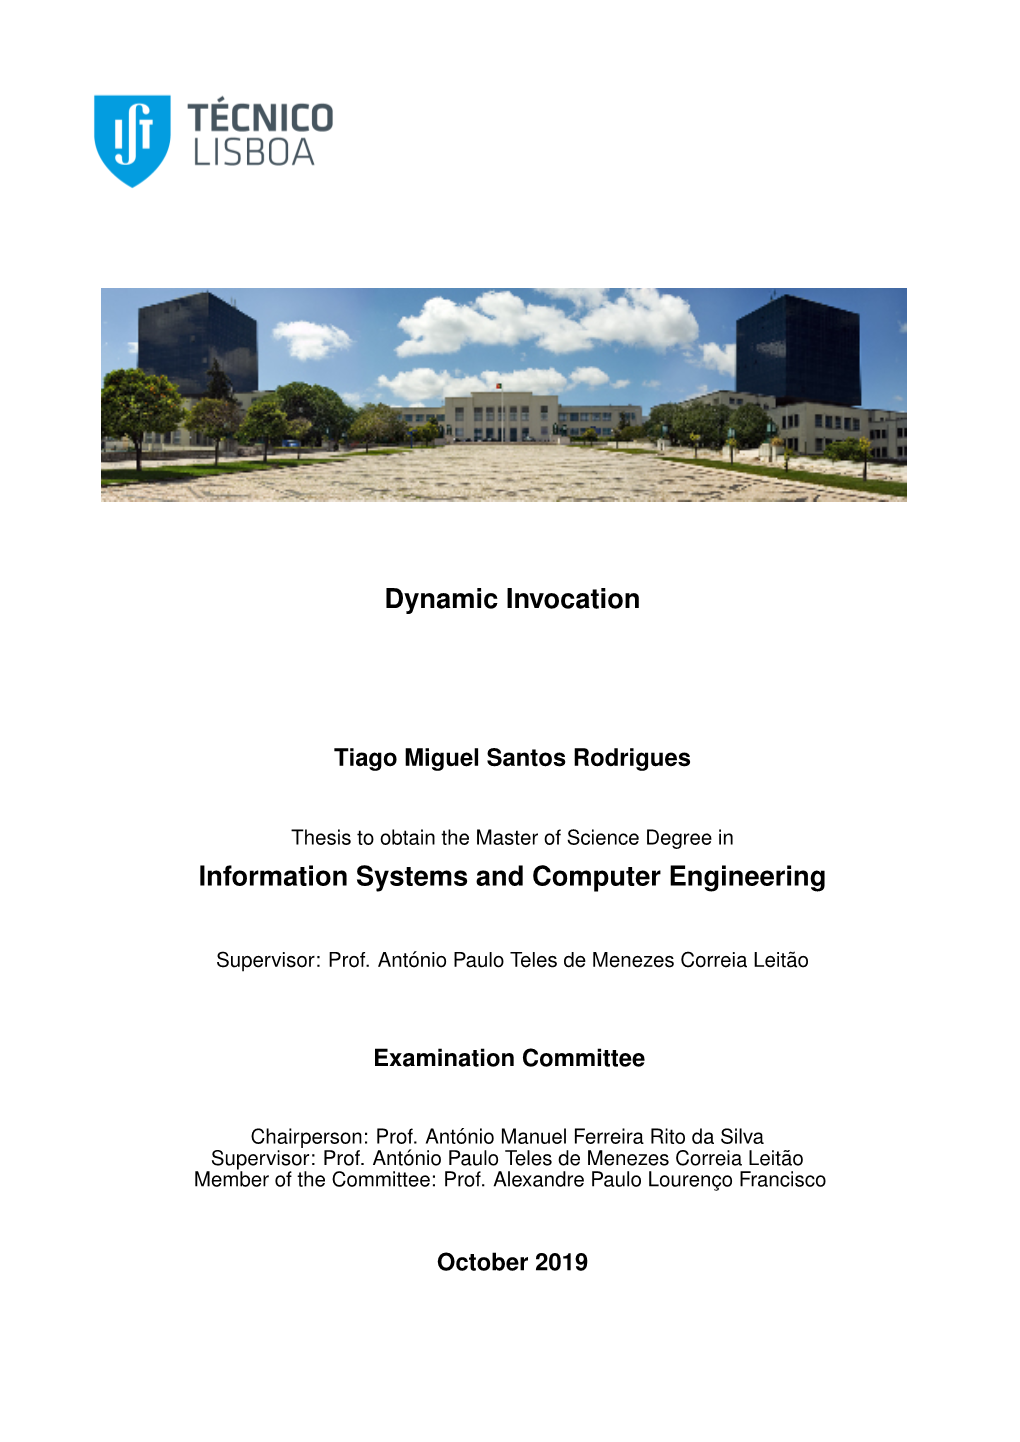 Dynamic Invocation Information Systems and Computer Engineering